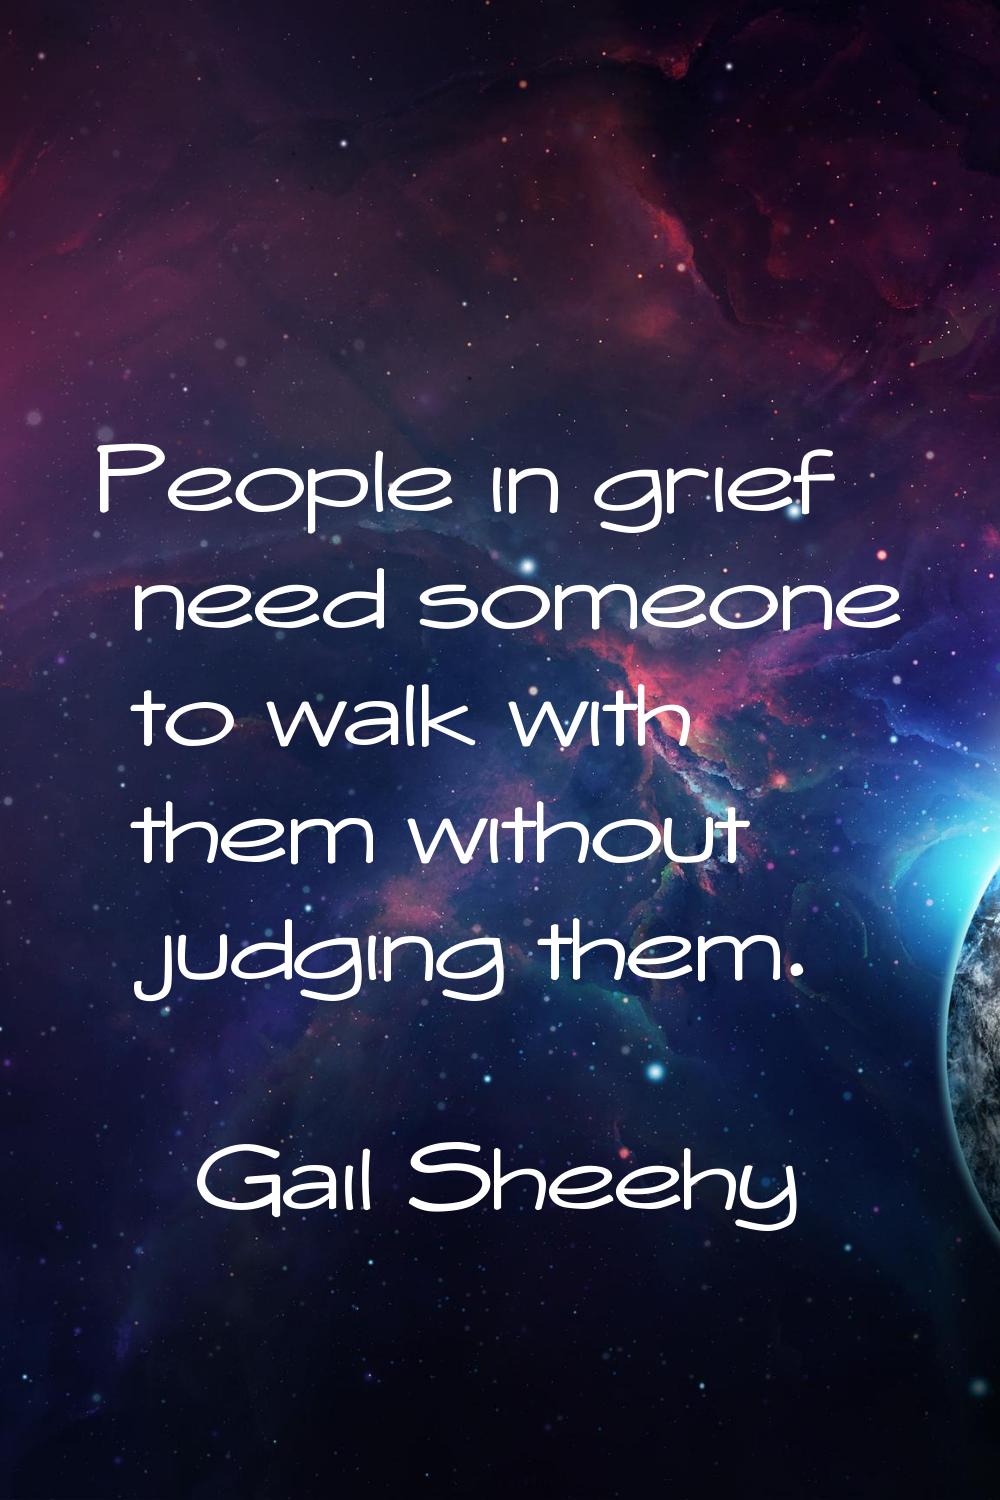 People in grief need someone to walk with them without judging them.